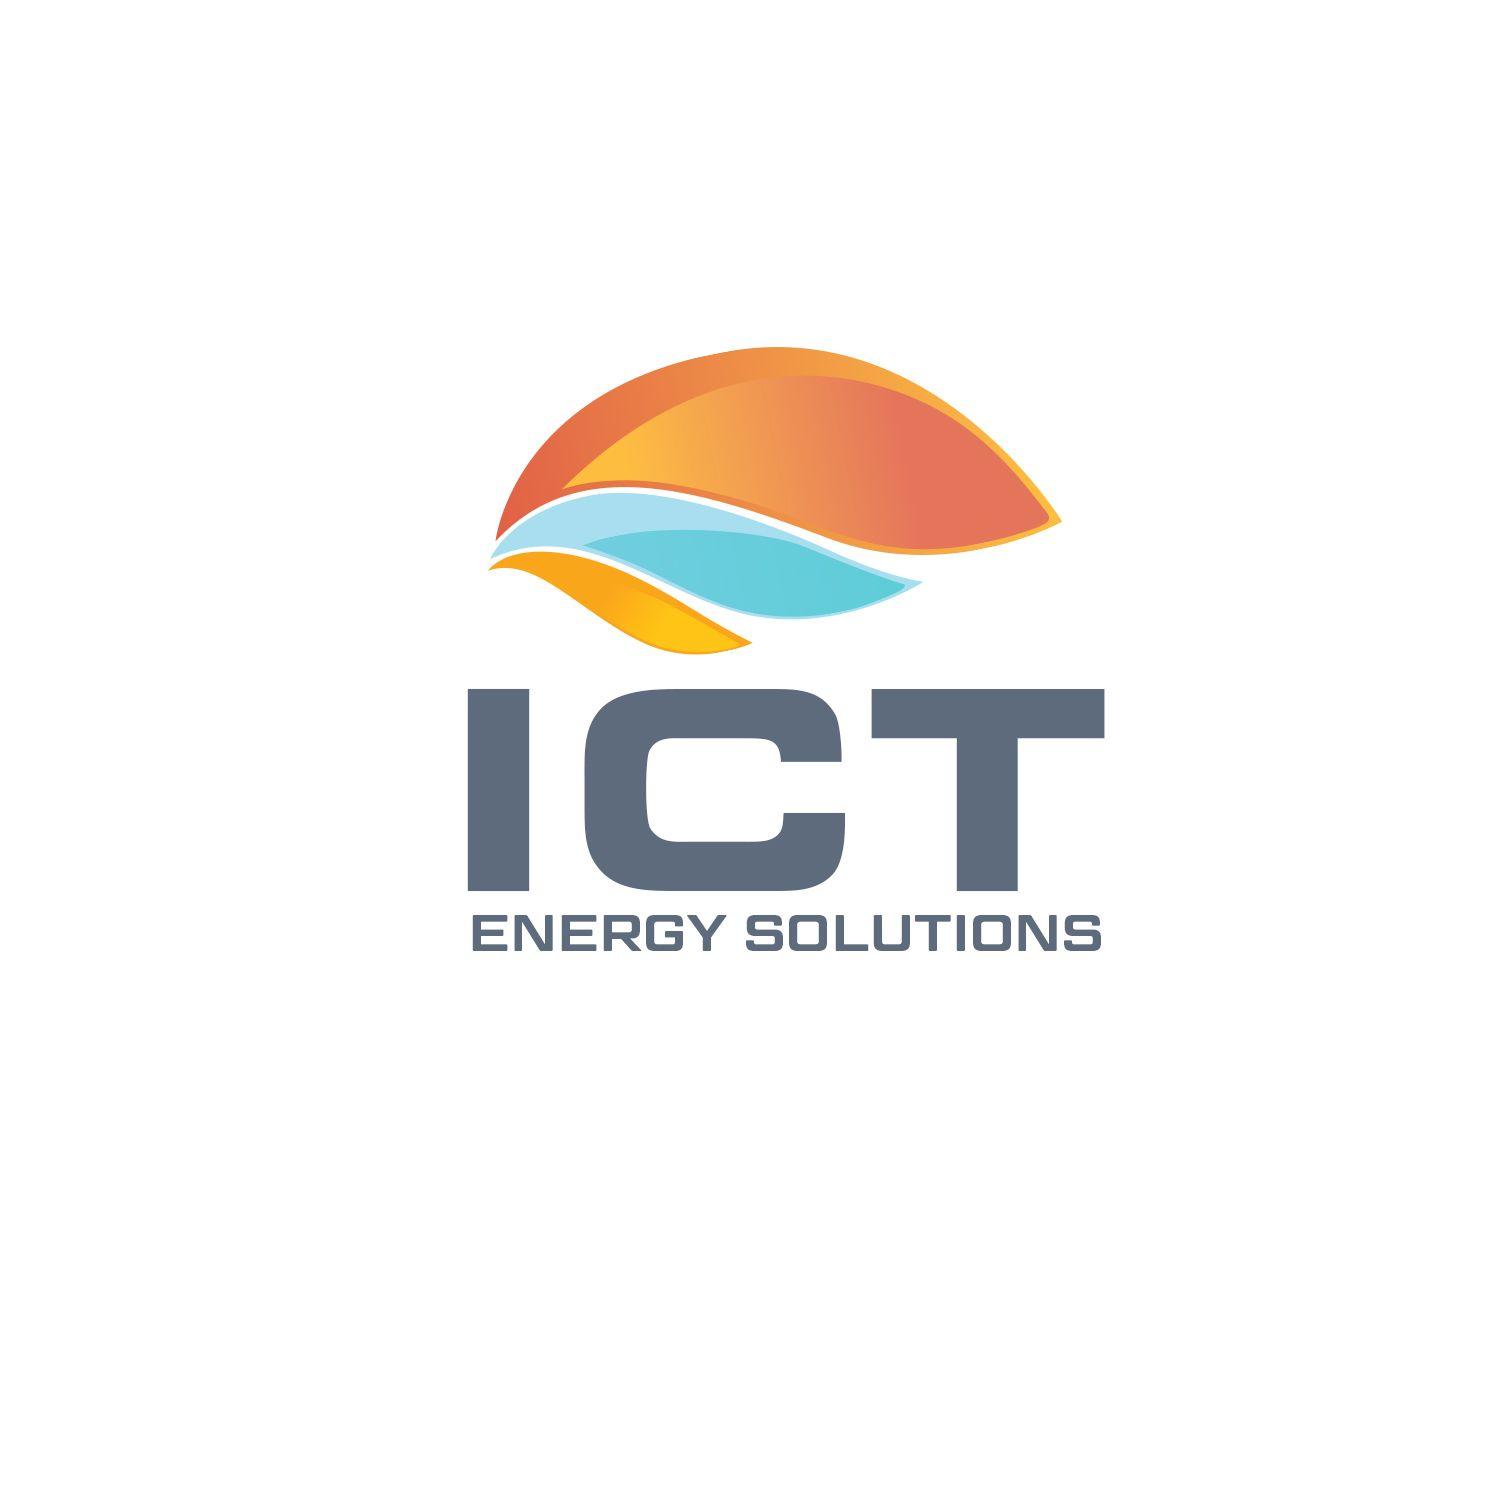 ICT Logo - Bold, Serious, Oil And Gas Logo Design for ICT Energy Solutions by K ...